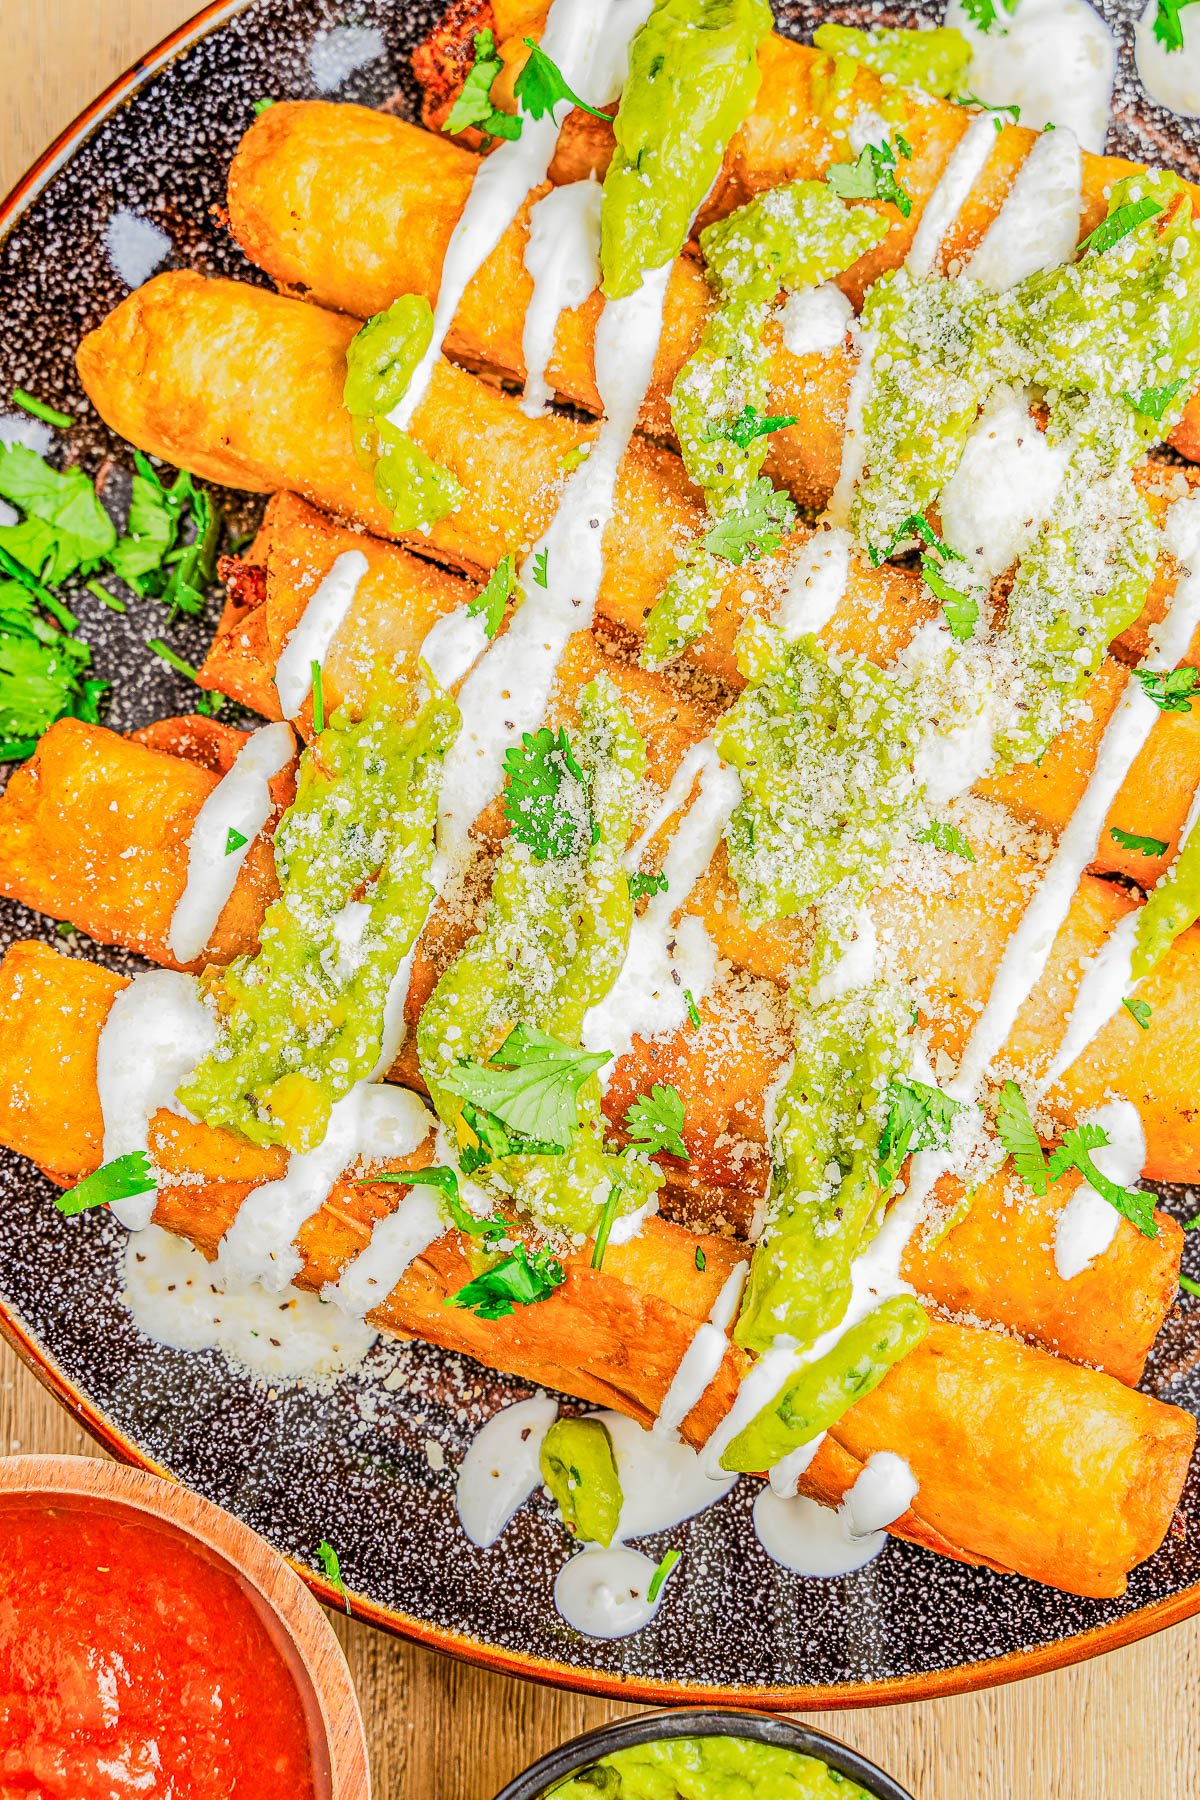 Plate of golden-brown taquitos drizzled with green sauce and cream, garnished with grated cheese and cilantro, served with a side of red salsa.